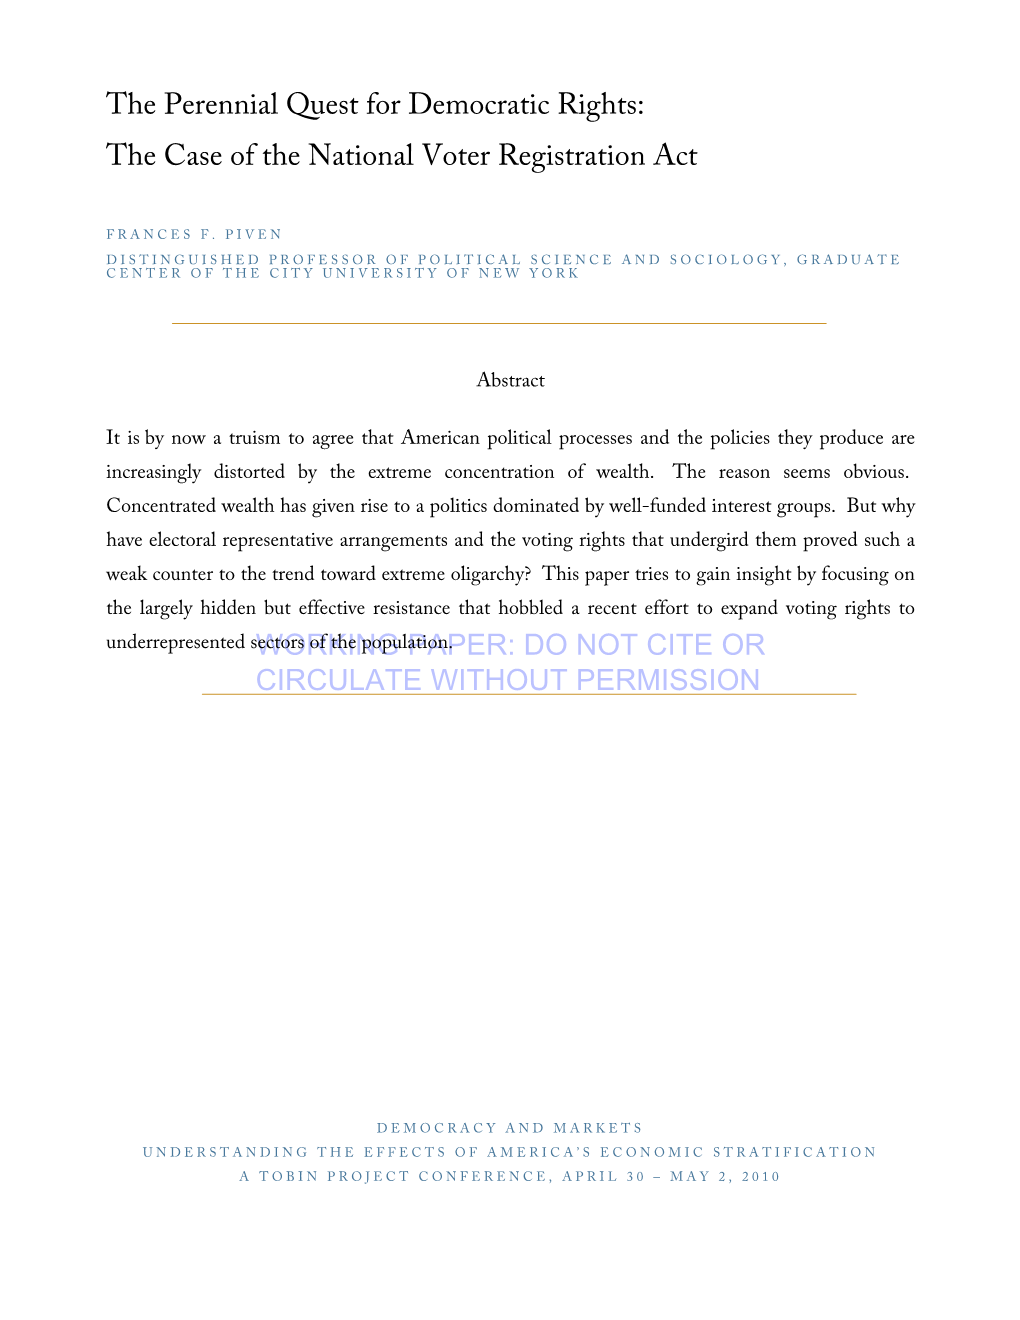 The Perennial Quest for Democratic Rights: the Case of the National Voter Registration Act